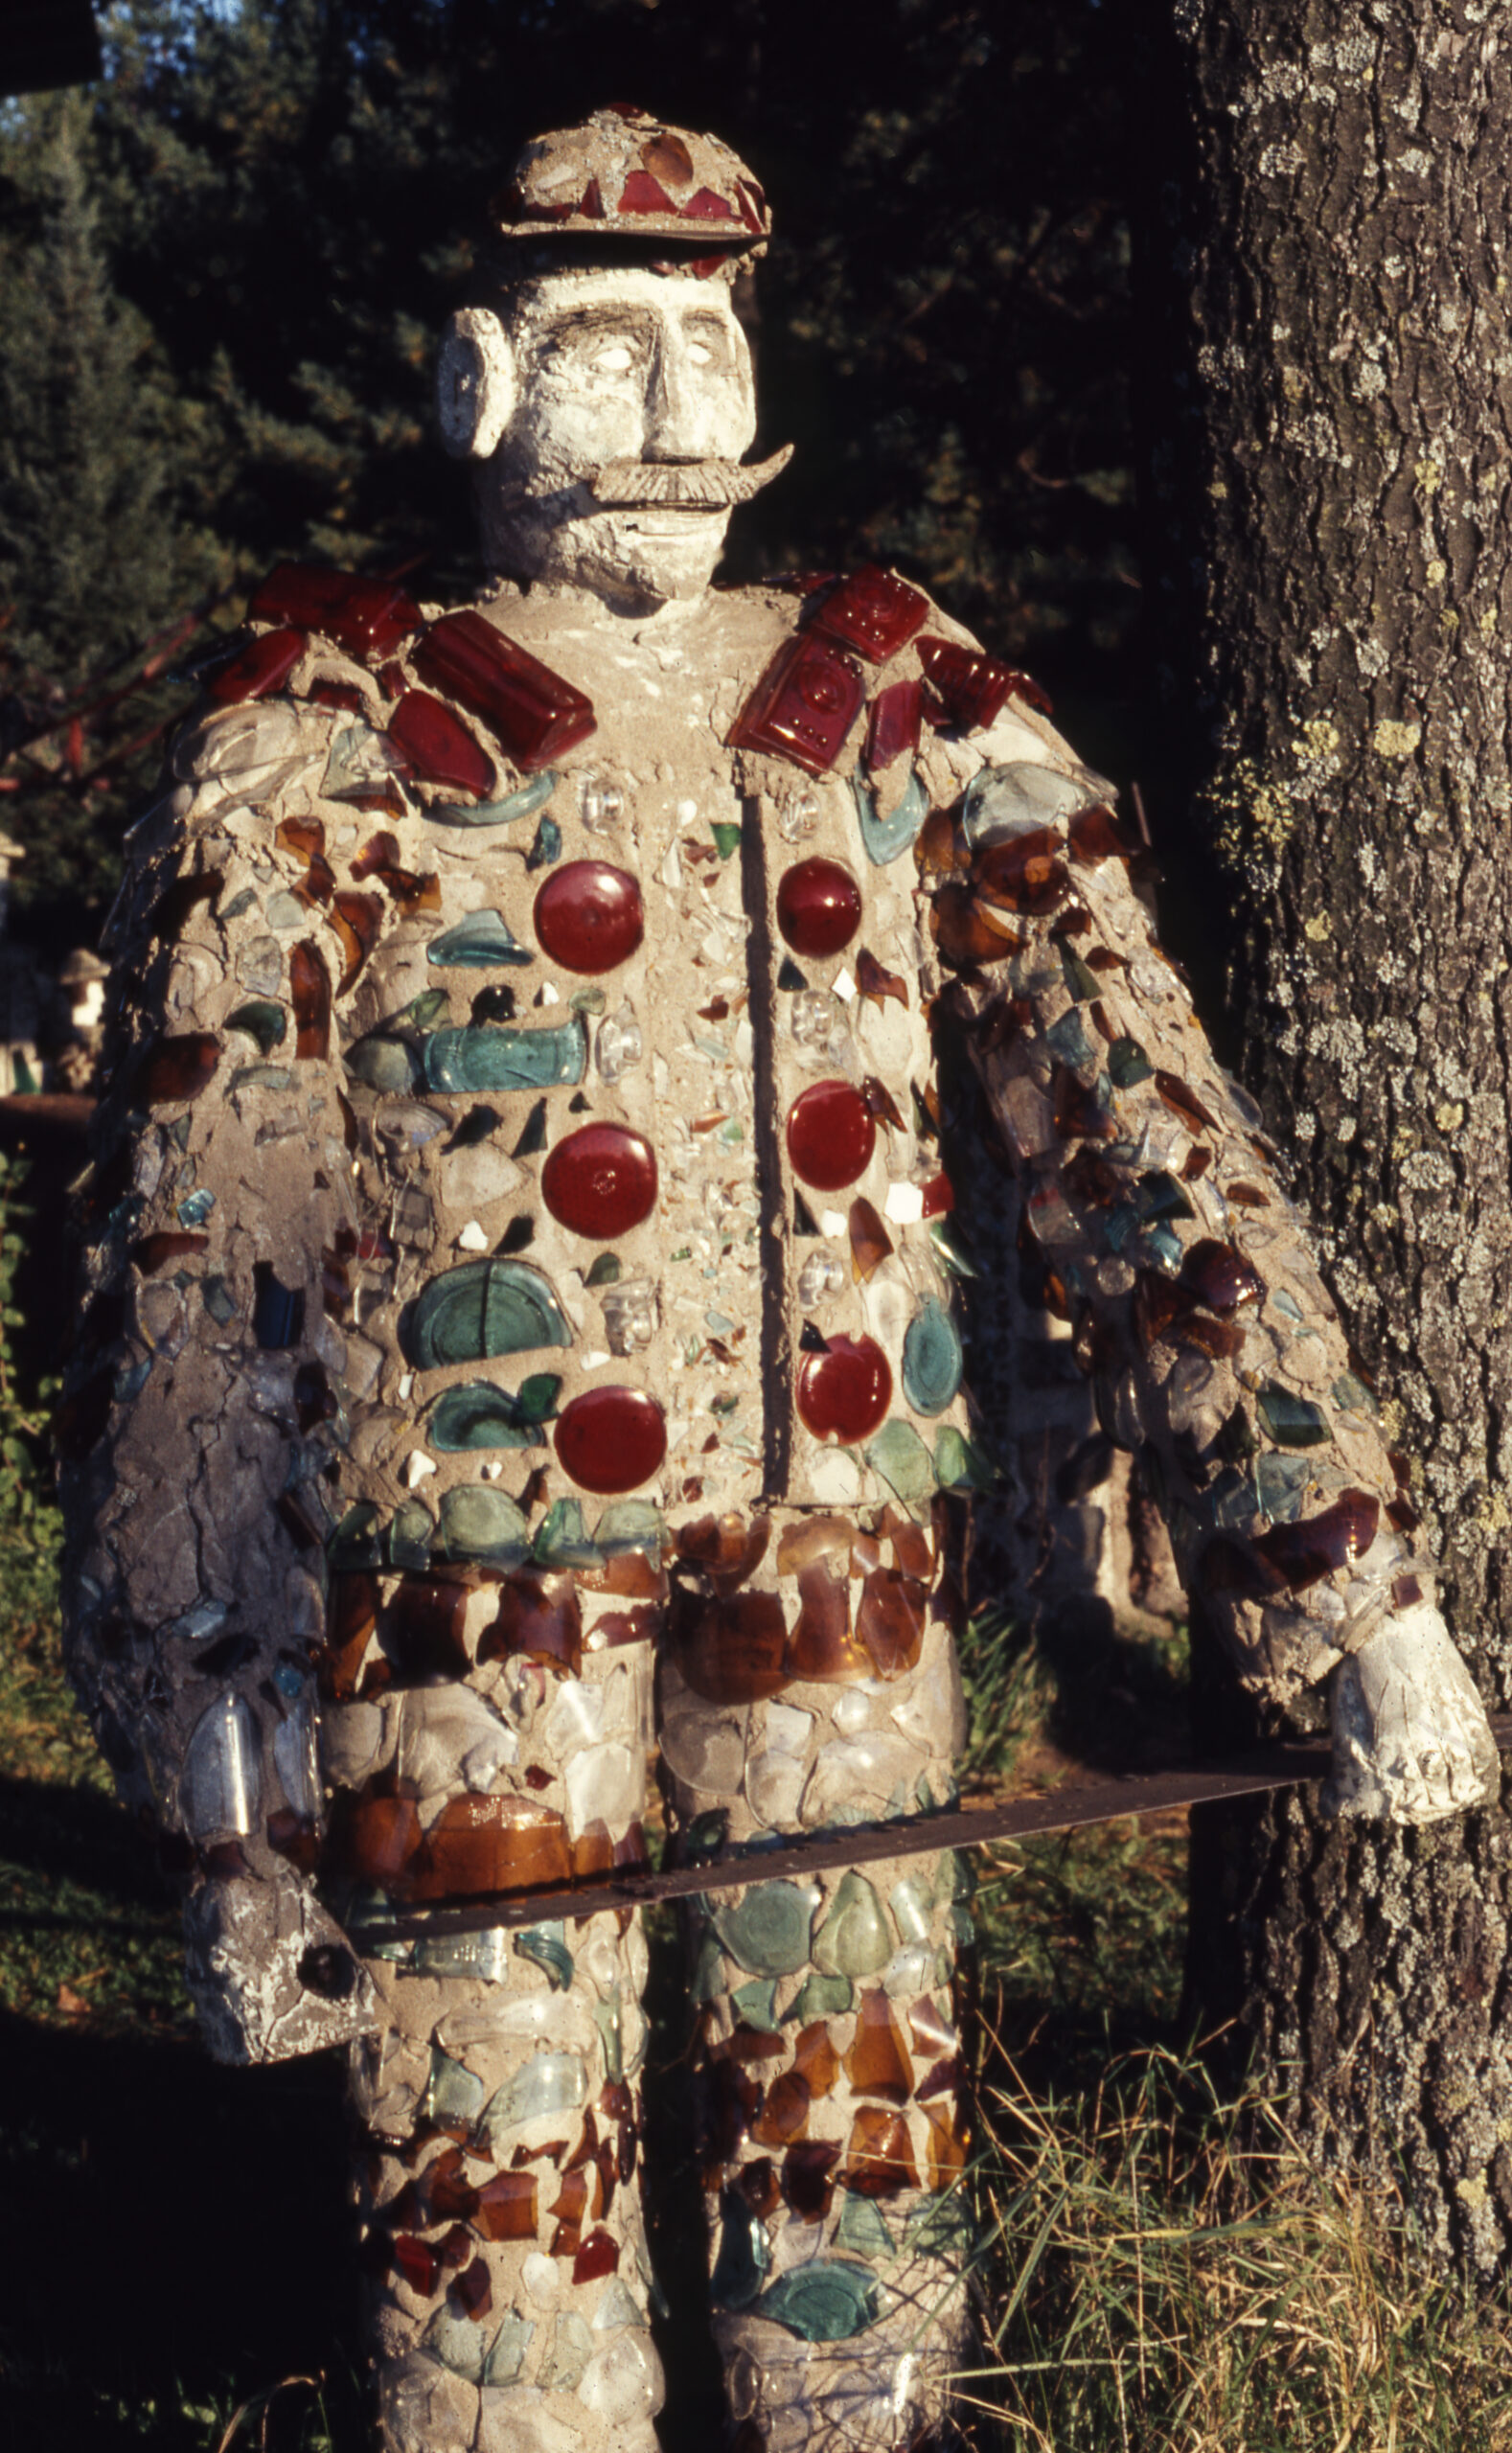 Detail shot of one of Smith’s “Paul Bunyan’s Lumberjacks” sculptures, embellished with glass from recycled beer bottles.